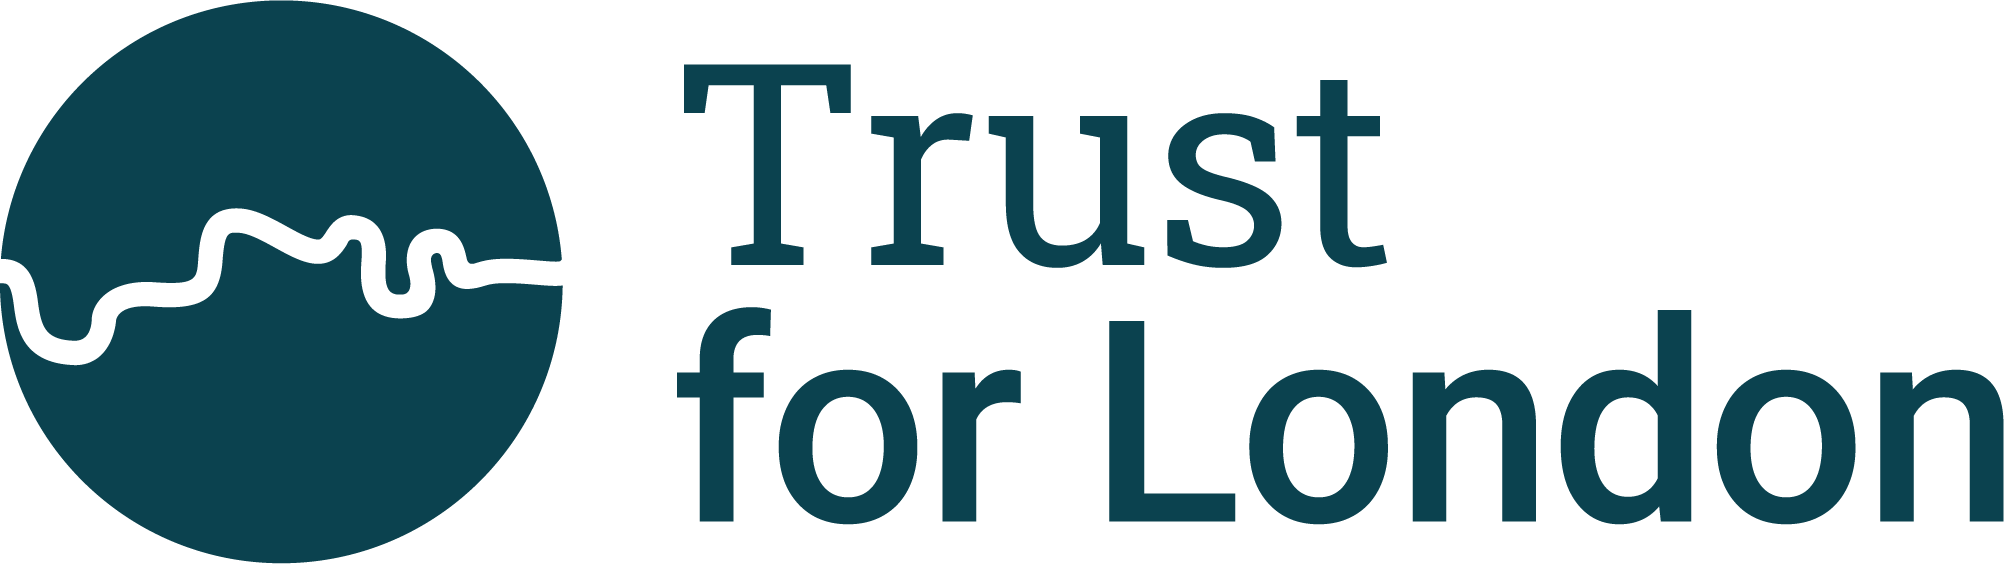 Trust for London Logo_Green.png